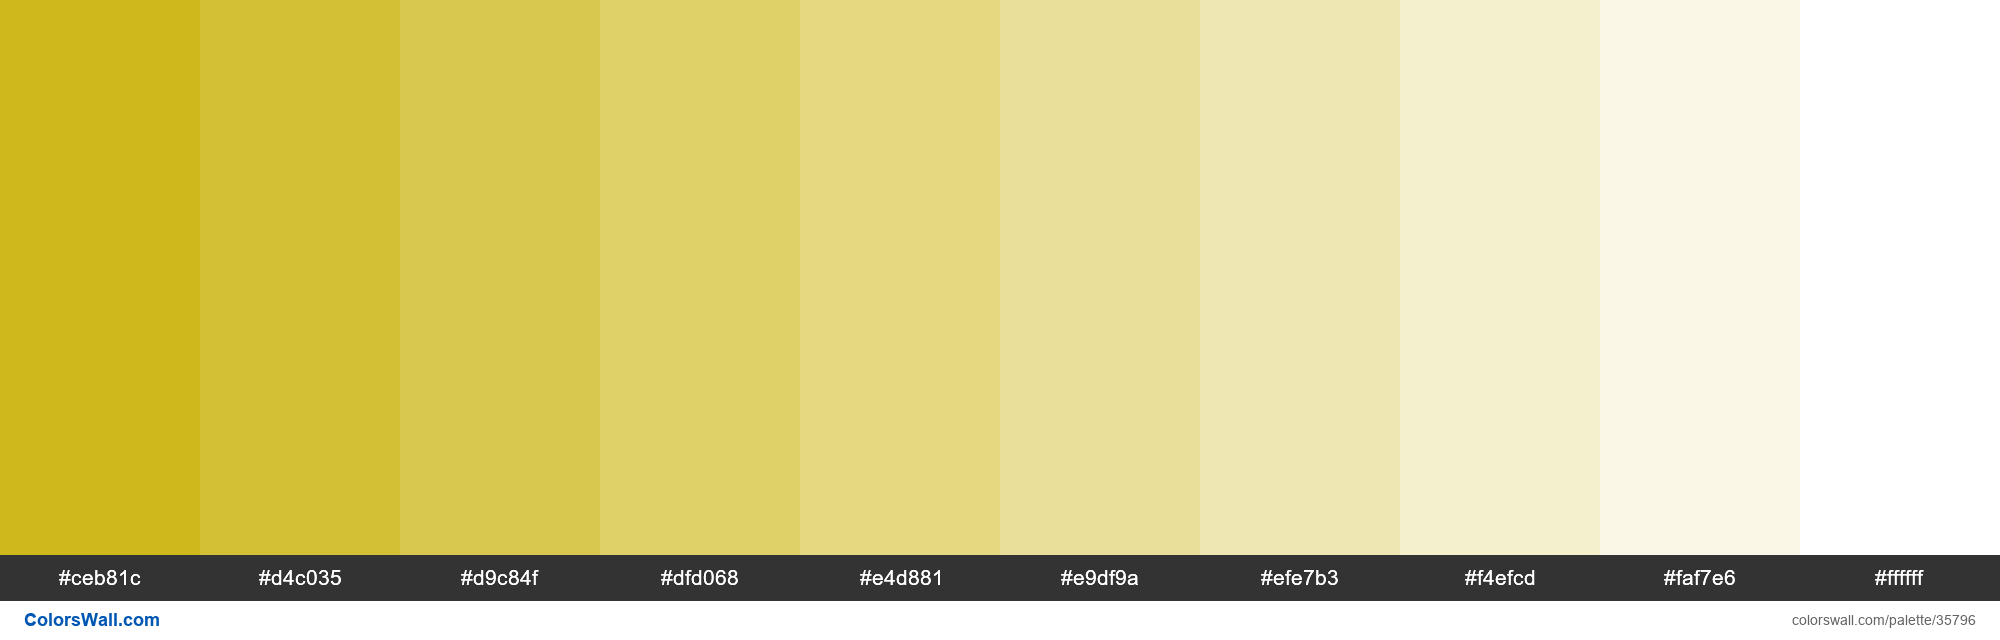 Tints XKCD Color brownish yellow #c9b003 hex colors palette ColorsWall